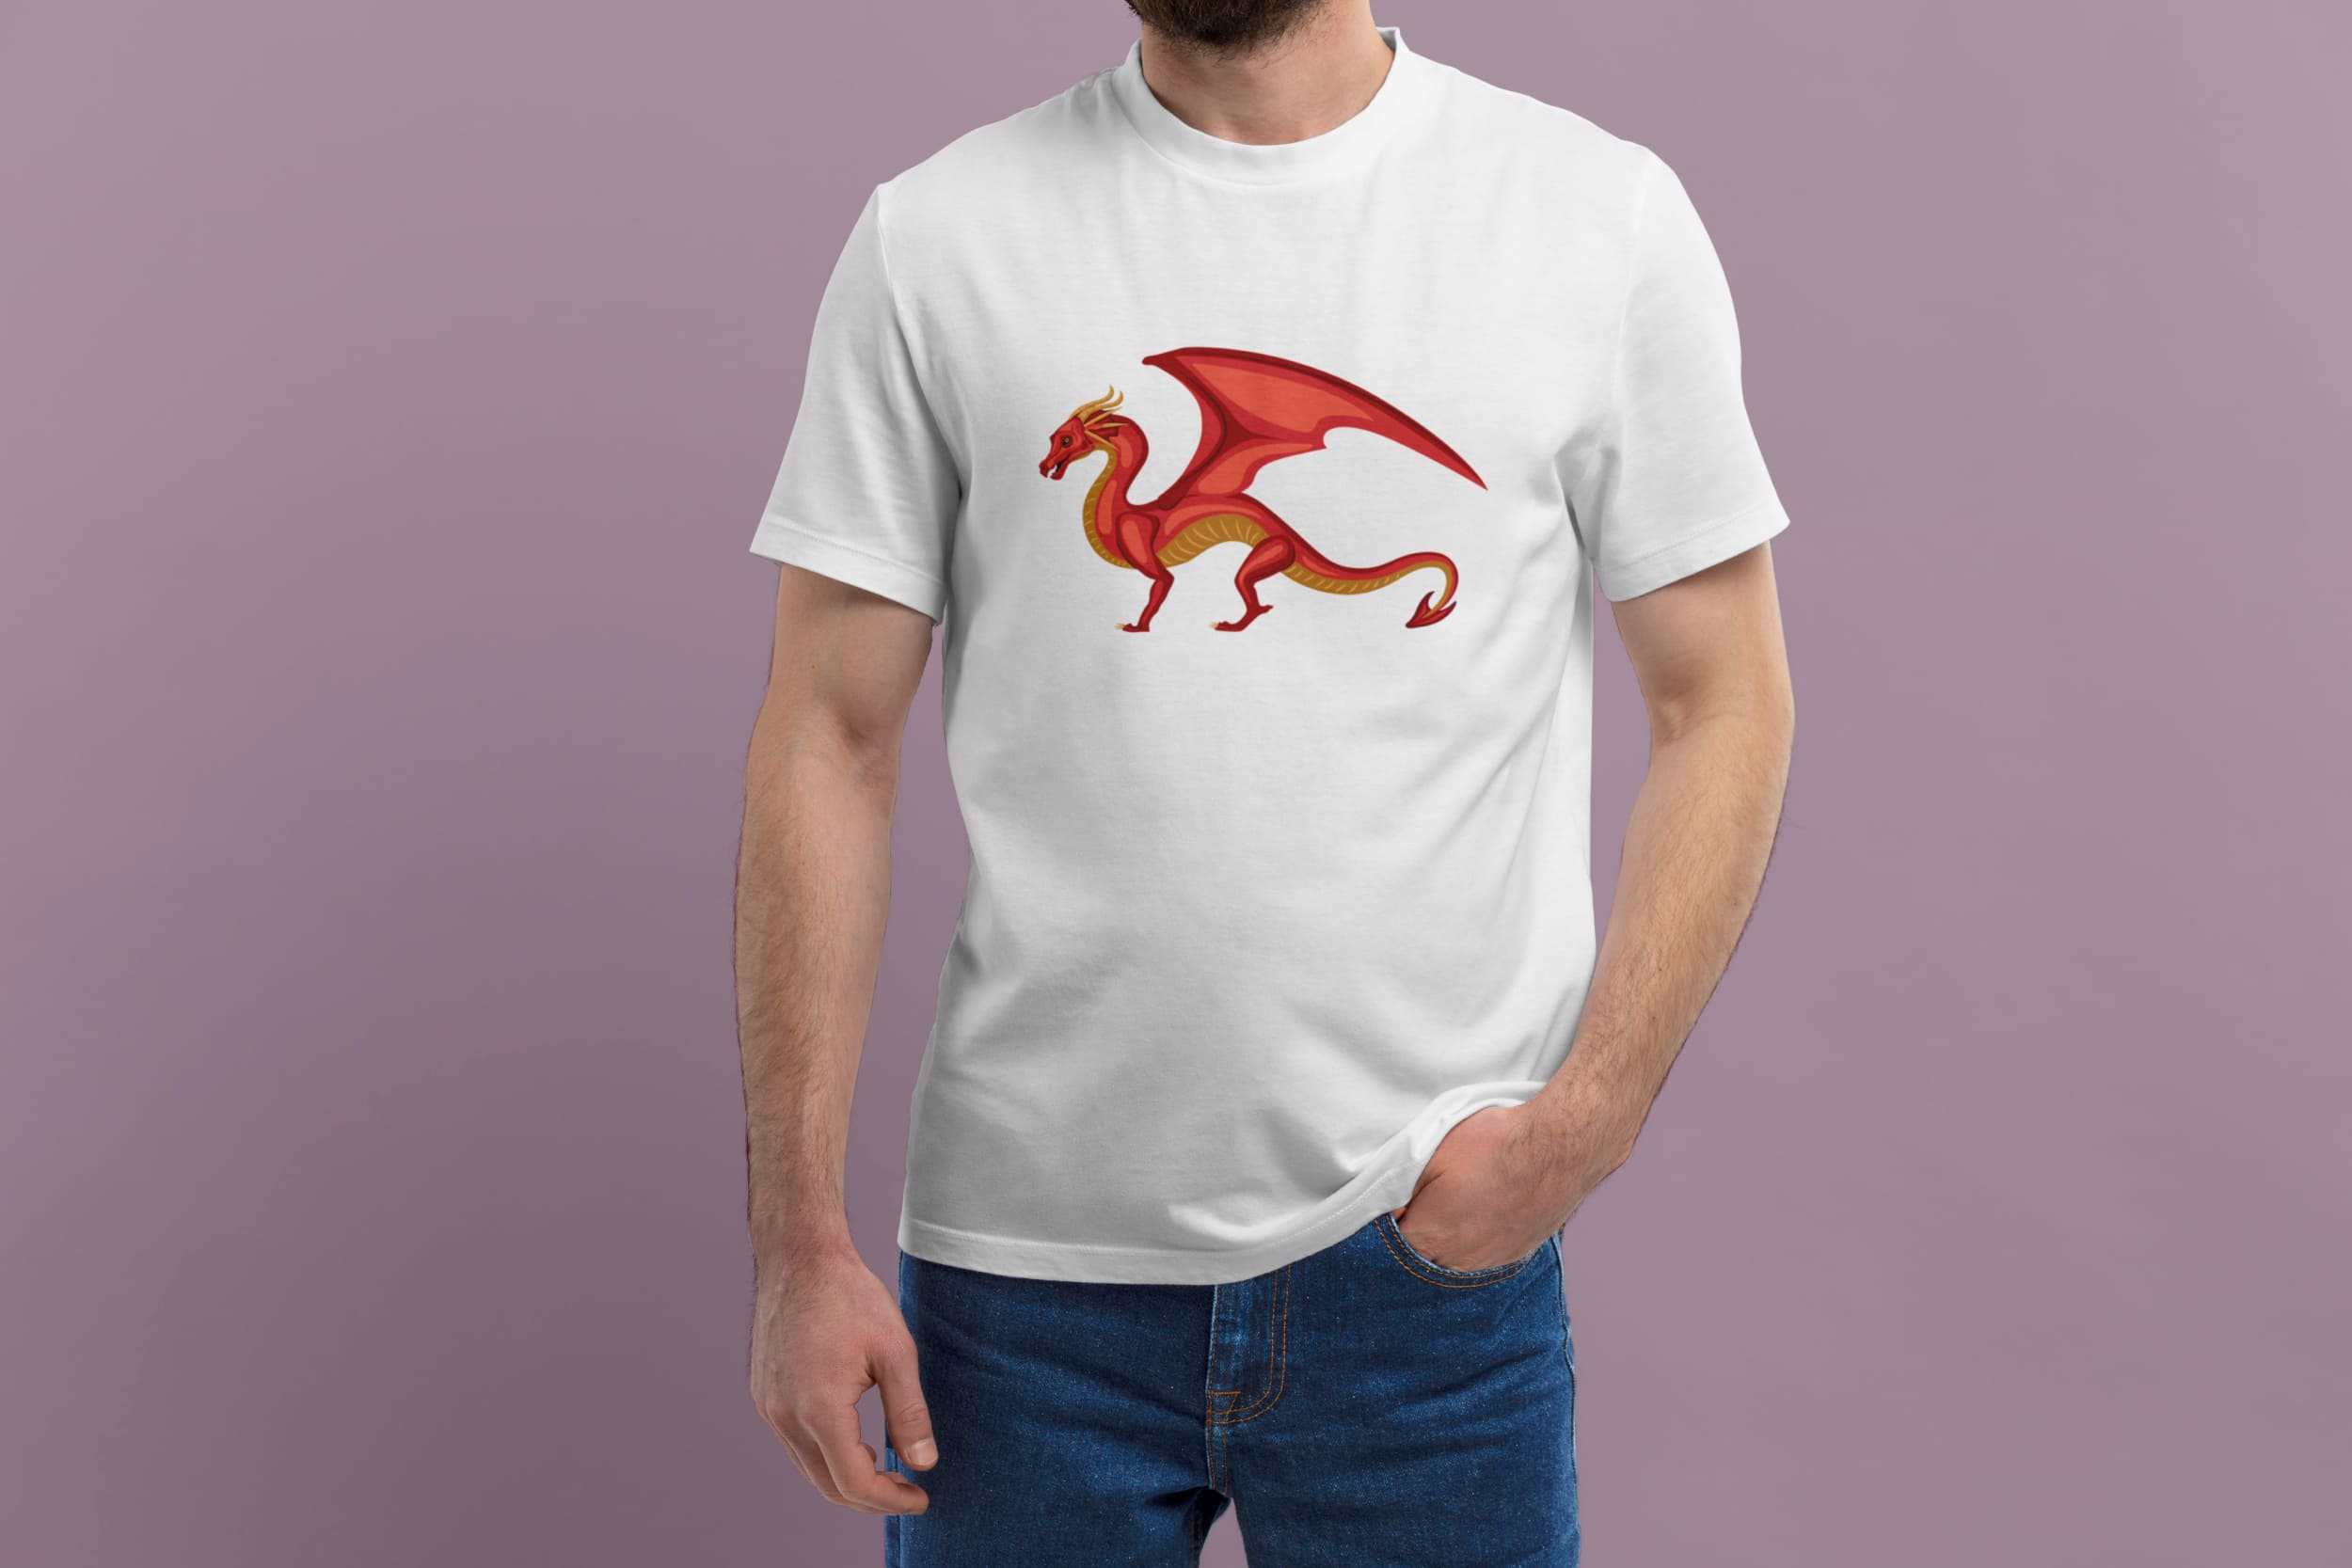 A white t-shirt with an image of a red dragon on a man.